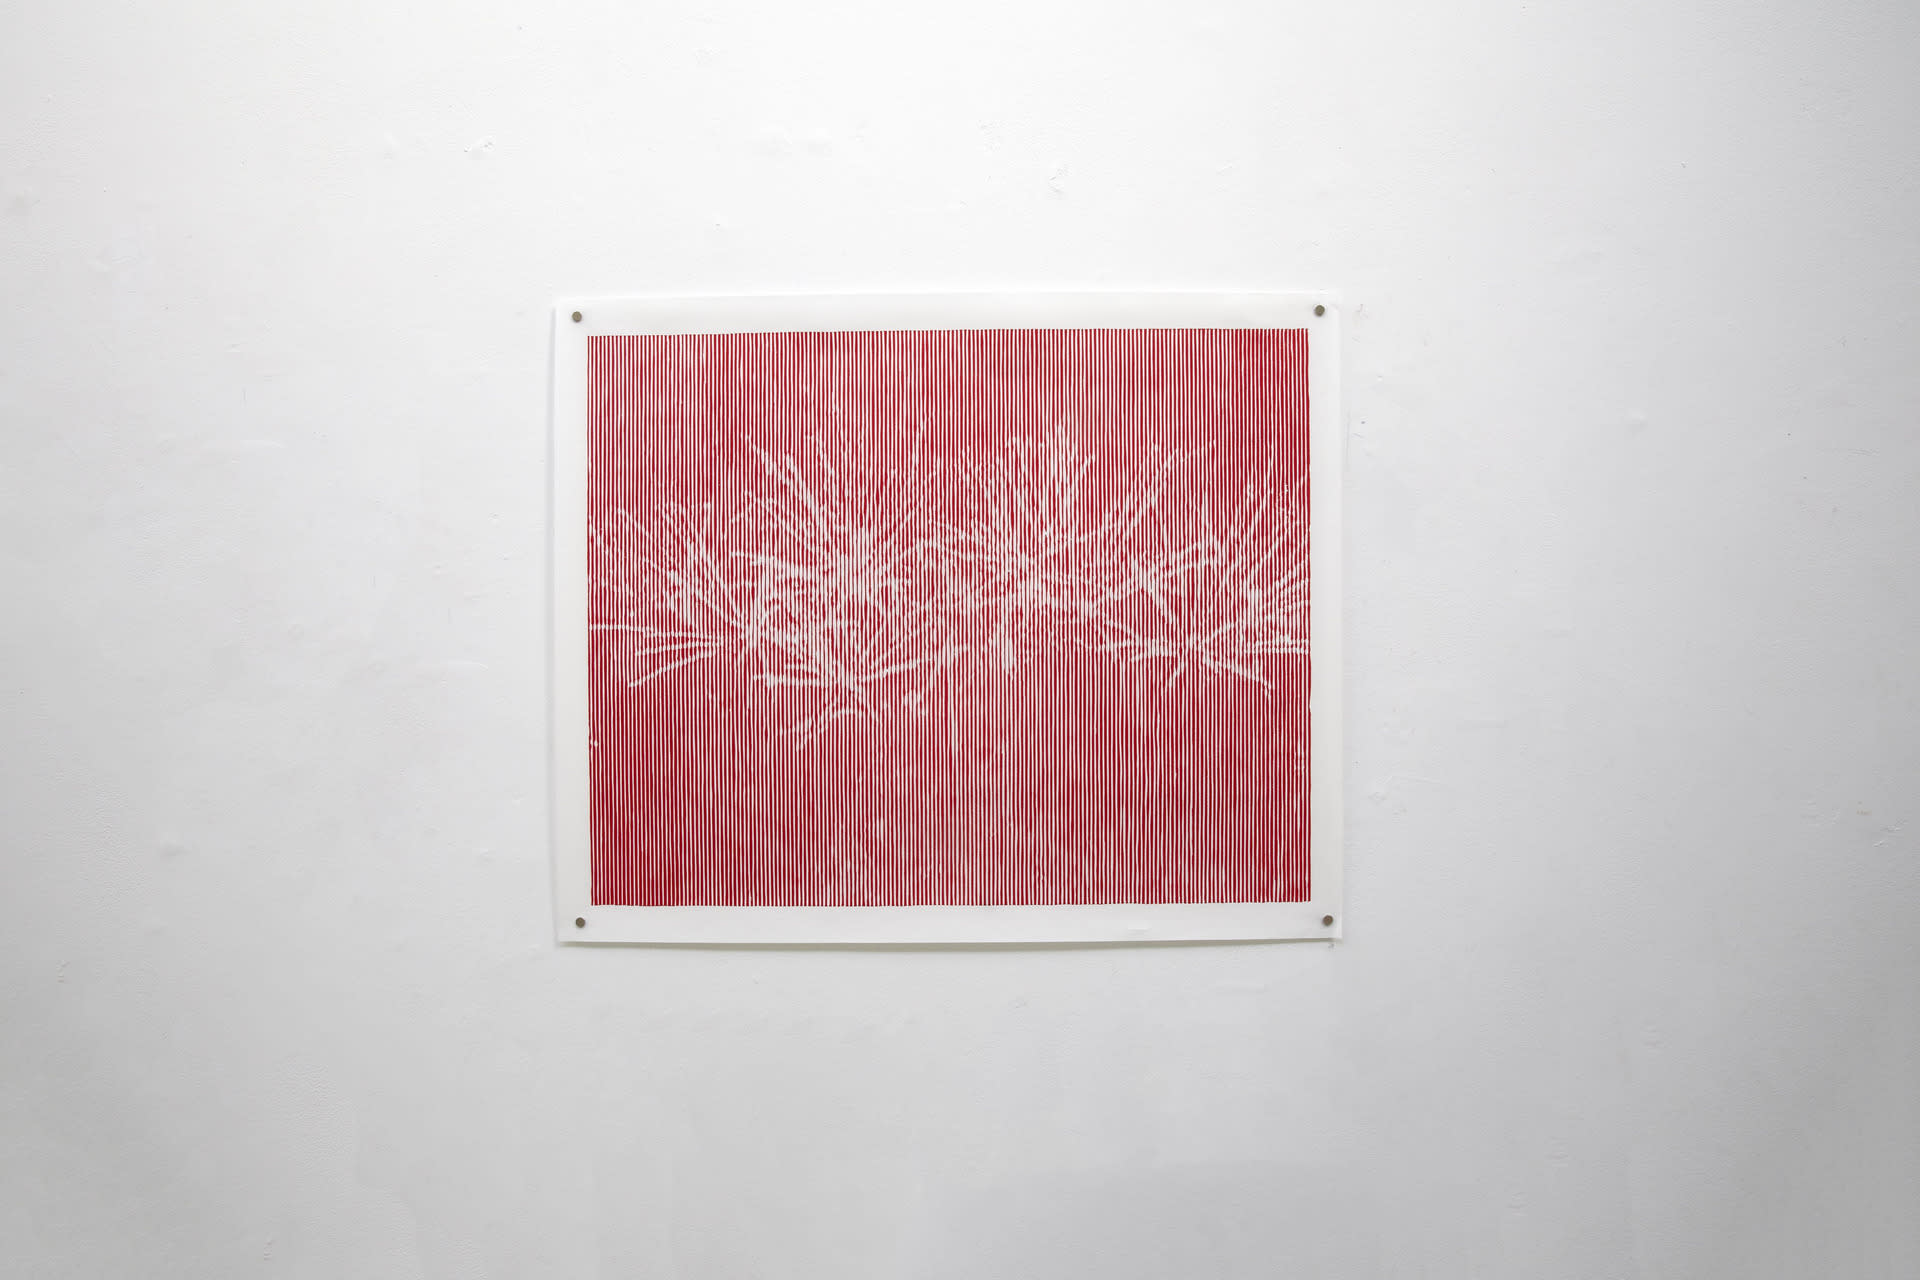 Woodcut, Hand printing with lithography ink on Chinese Xuan paper, 79cm x 65cm